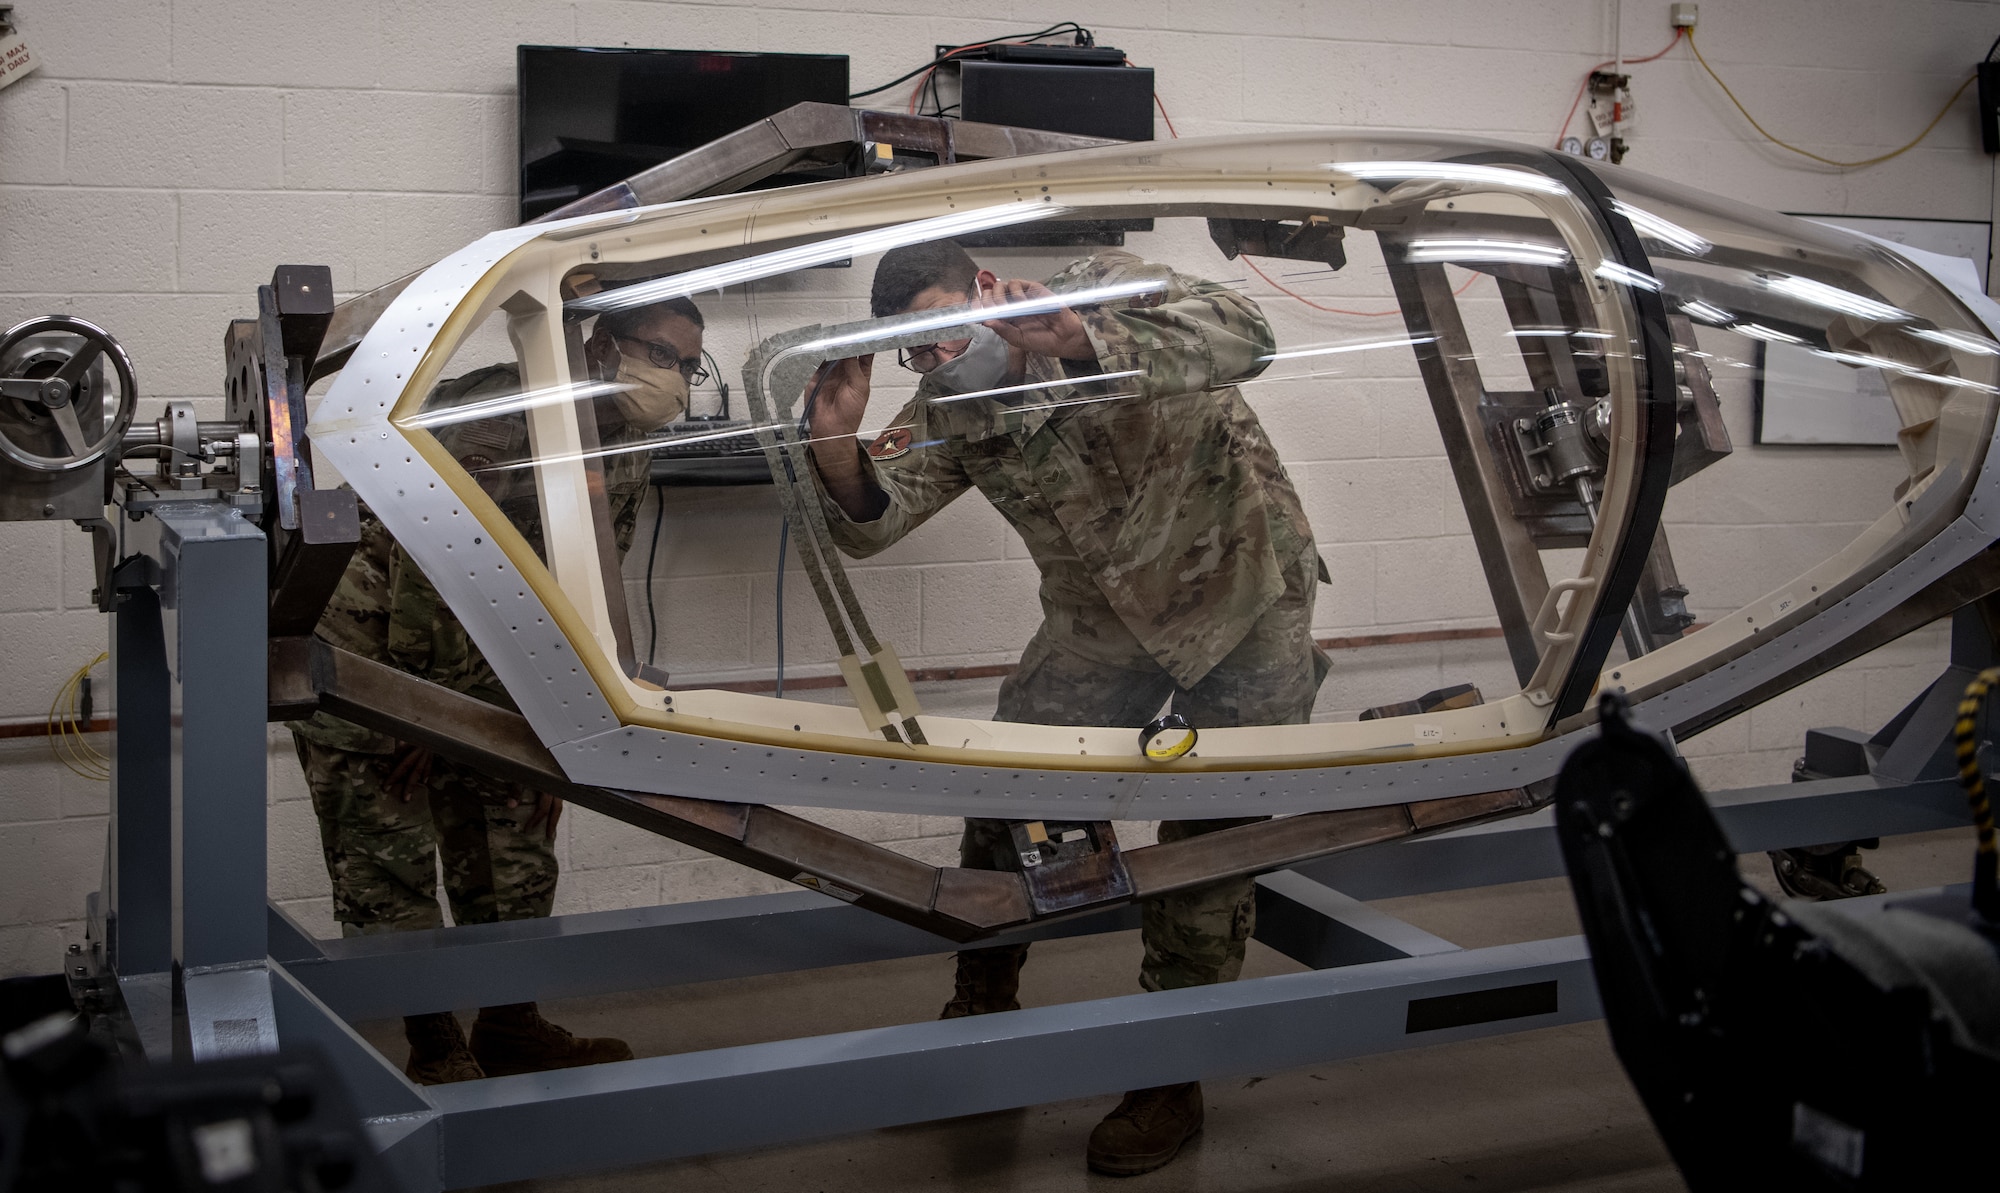 Senior Airman Matthew Romano, 56th Component Maintenance Squadron aircrew egress systems journeyman, (left) trains Airman 1st Class Delwyn Travillion, 56th Component Maintenance Squadron aircrew egress systems apprentice, on the installation of a flexible linear shaped charge (FLSC) July 13, 2020, at Luke Air Force Base, Ariz. The egress shop implemented a 3D printed F-35A Lightning II canopy to enhance training efficiency and reduce training time. (U.S. Air Force photo by Airman 1st Class Dominic Tyler)